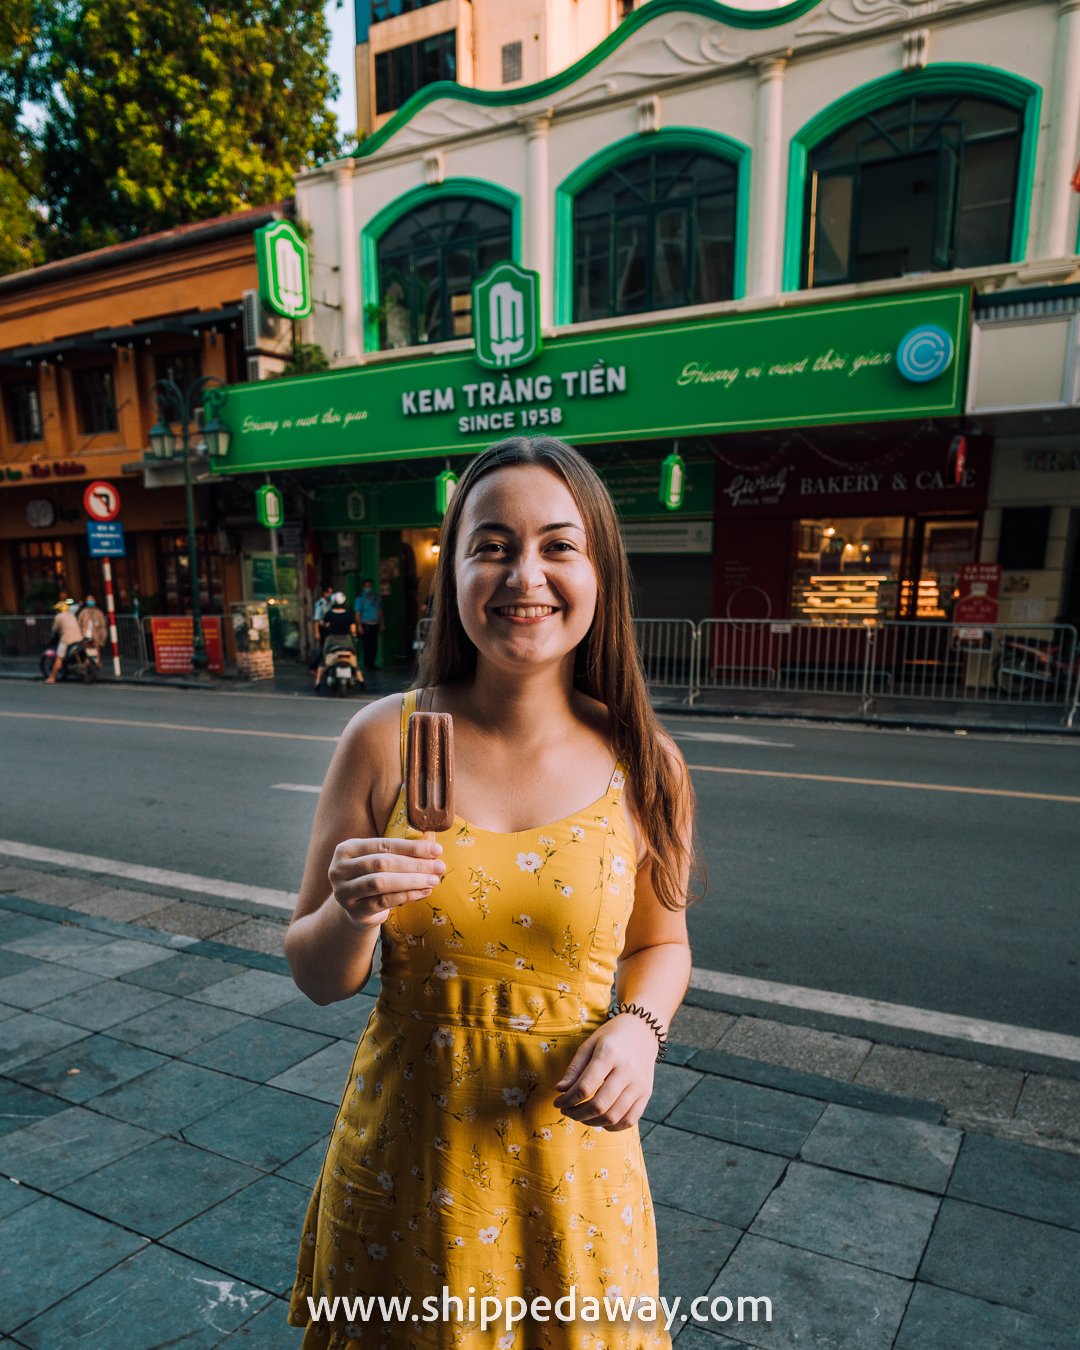 Arijana Tkalcec with a ice cream stick from Kem Trang Tien, most famous ice cream shop in Hanoi, near Old Quarter